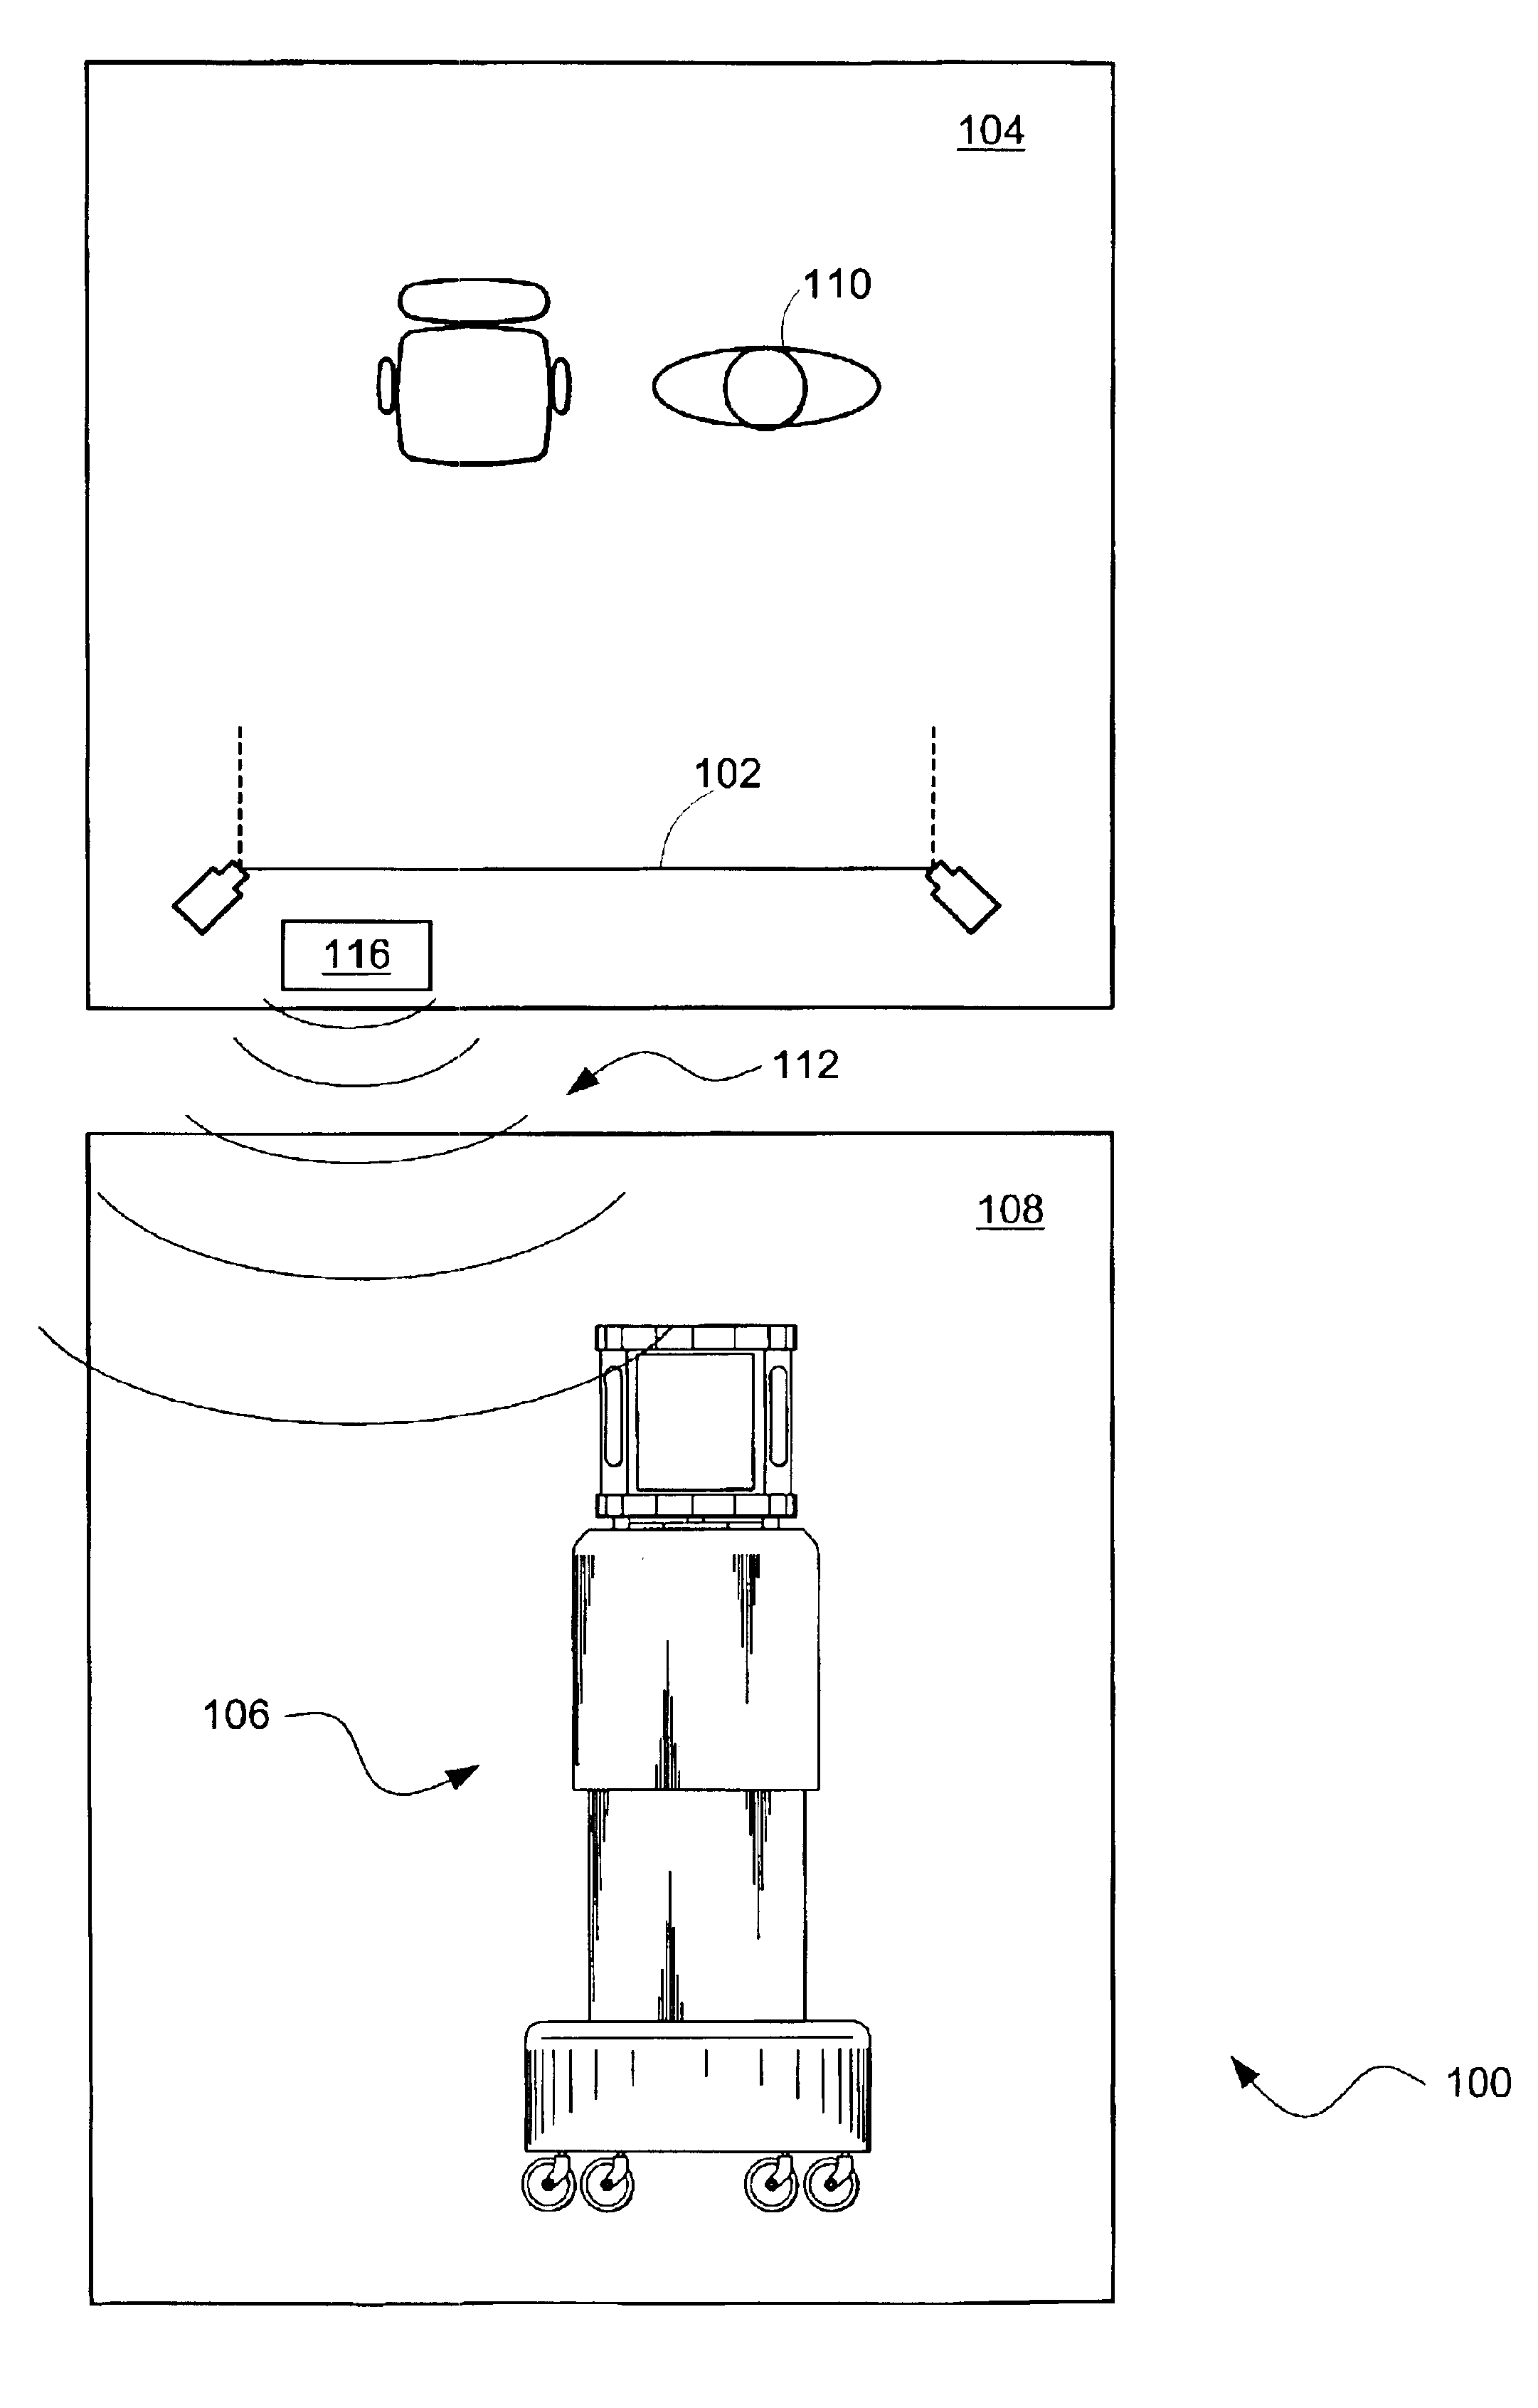 Telepresence system with automatic user-surrogate height matching